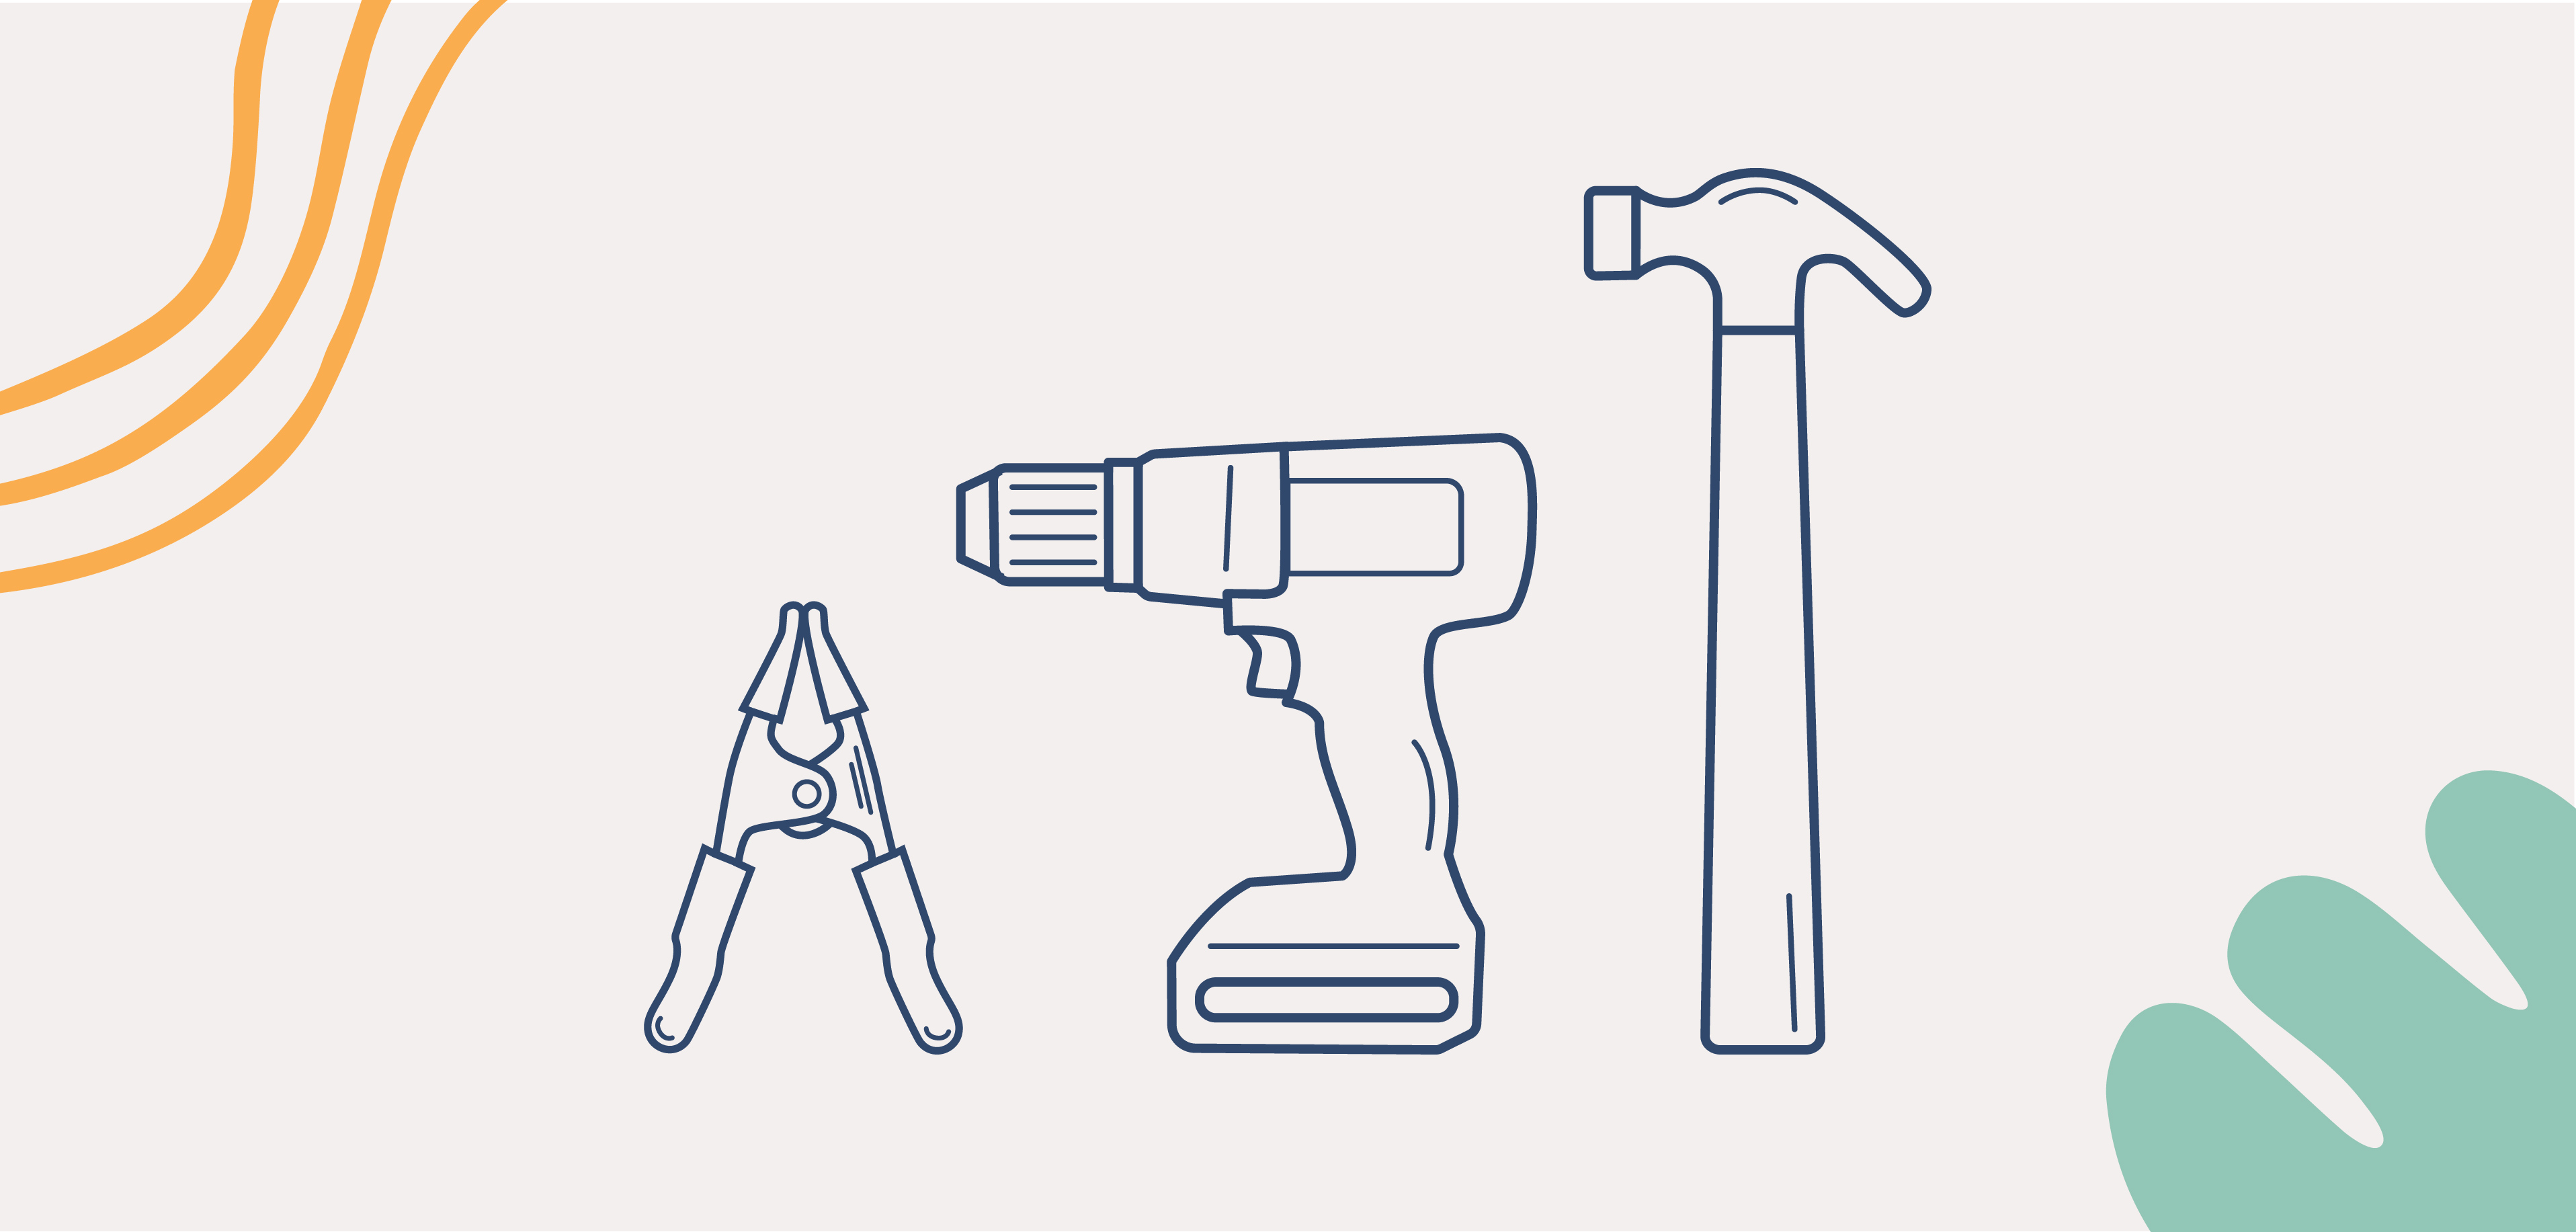 Illustration showing a power drill driver, hammer, and small clamp